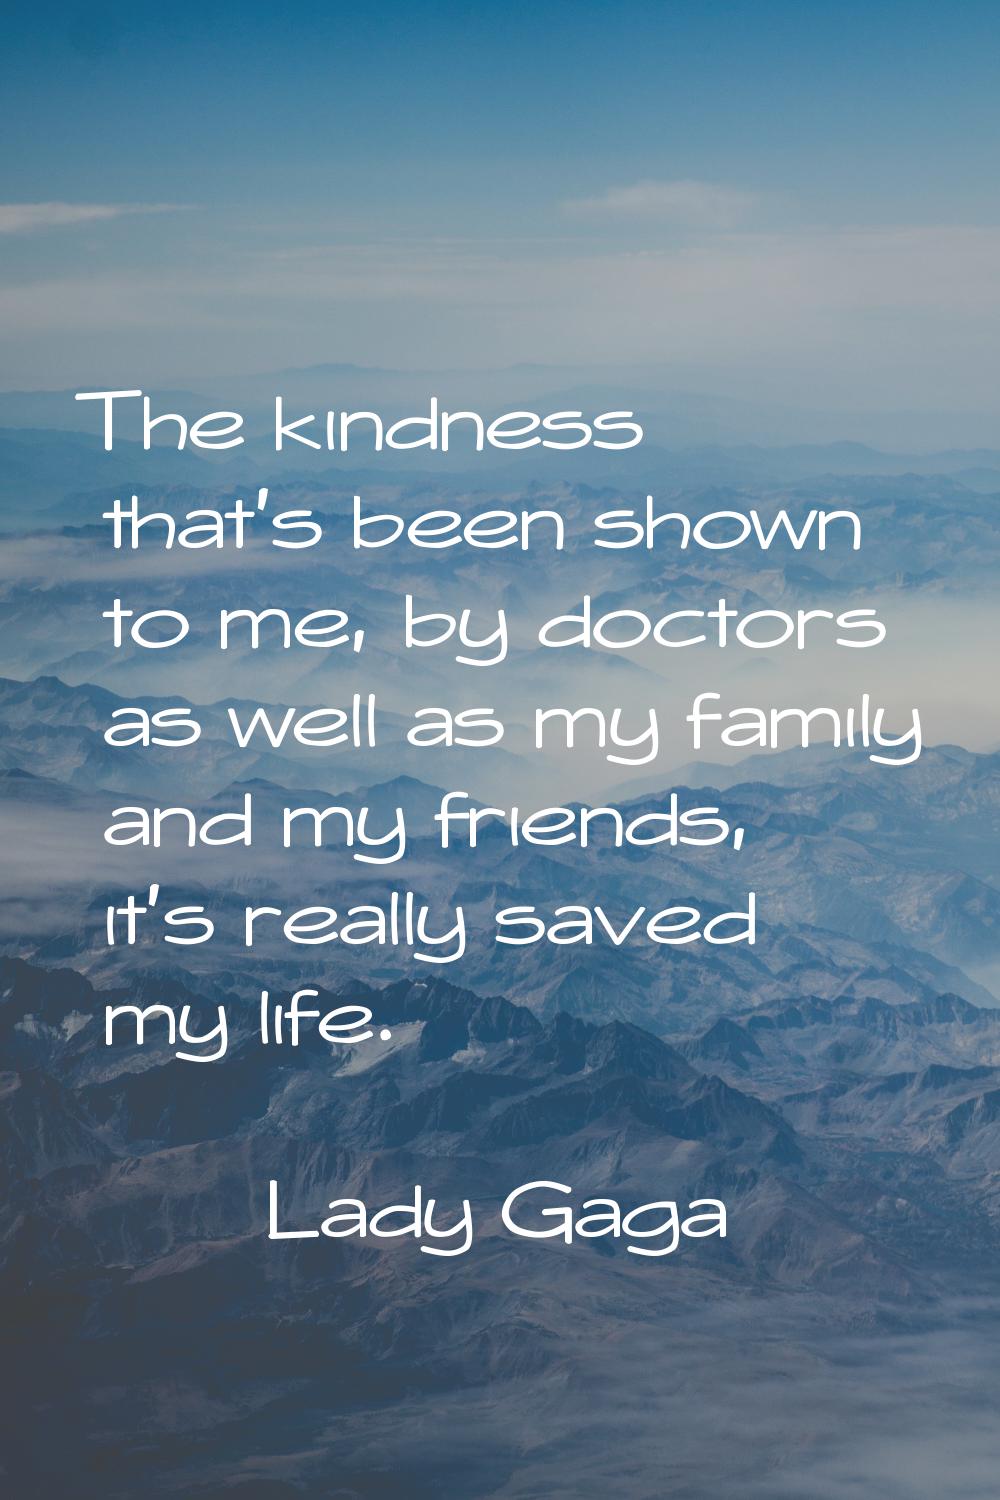 The kindness that's been shown to me, by doctors as well as my family and my friends, it's really s